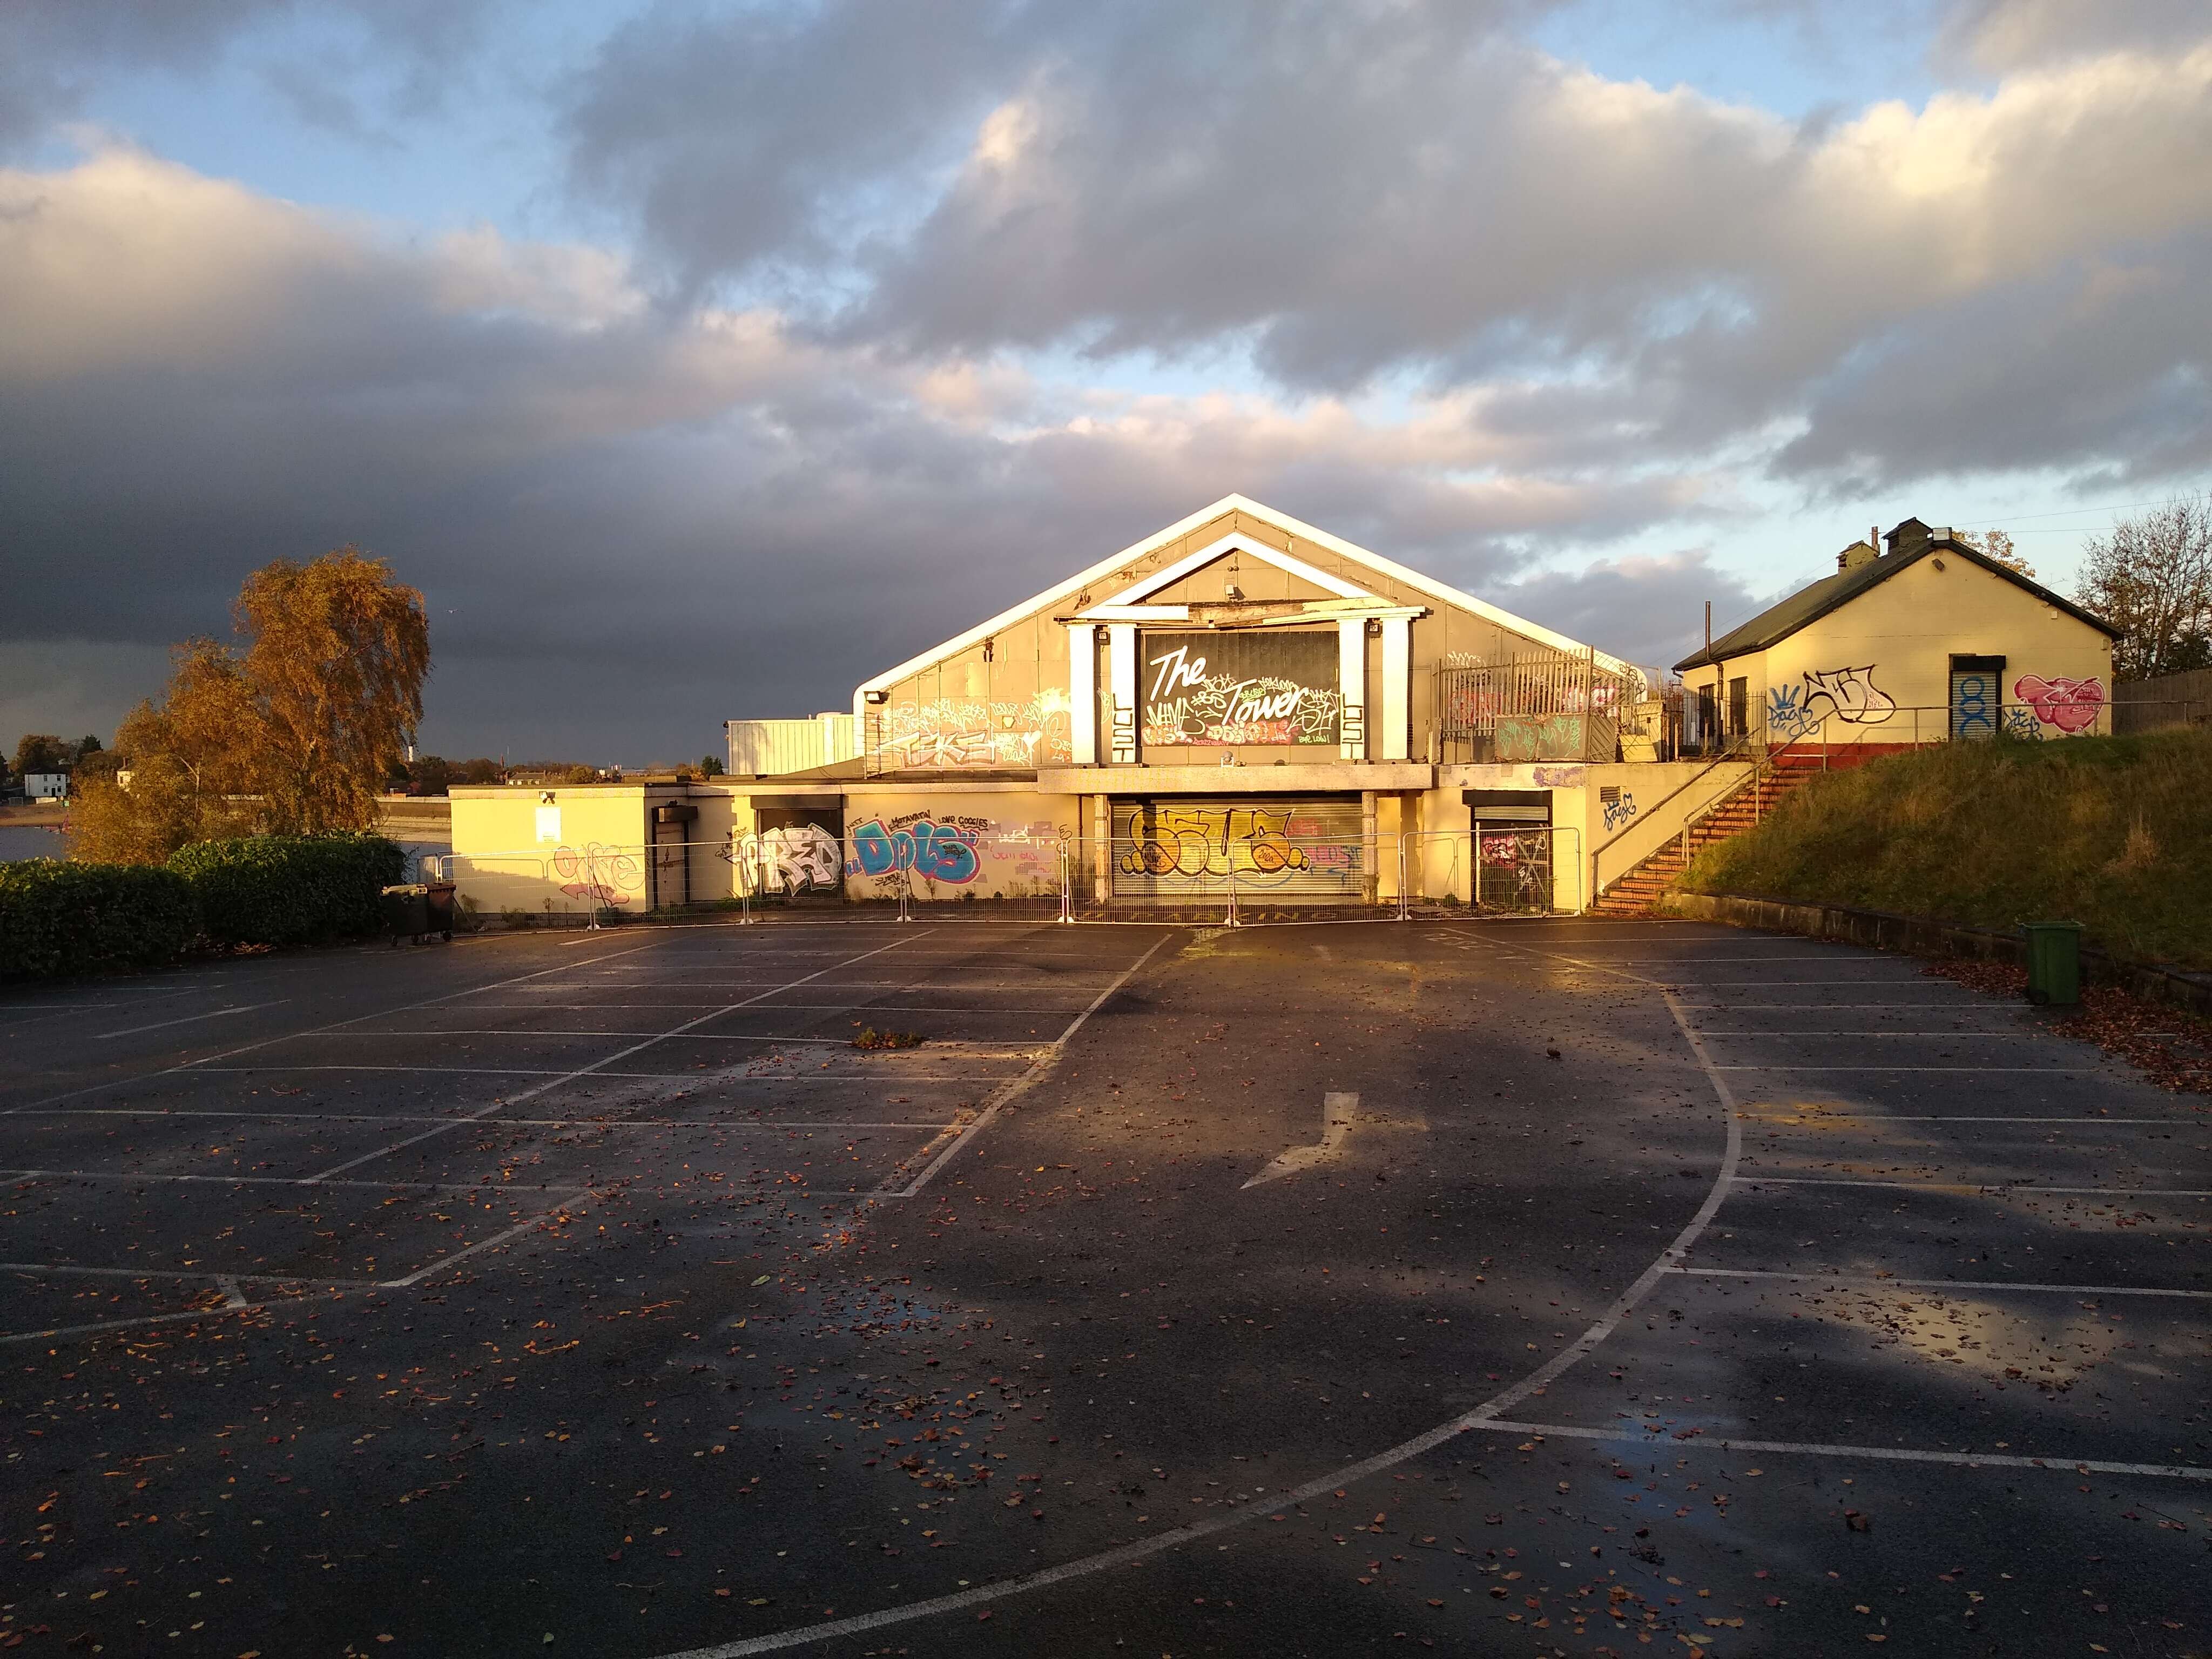 A building with graffiti in the evening light. An empty tarmac car park is in the foreground.